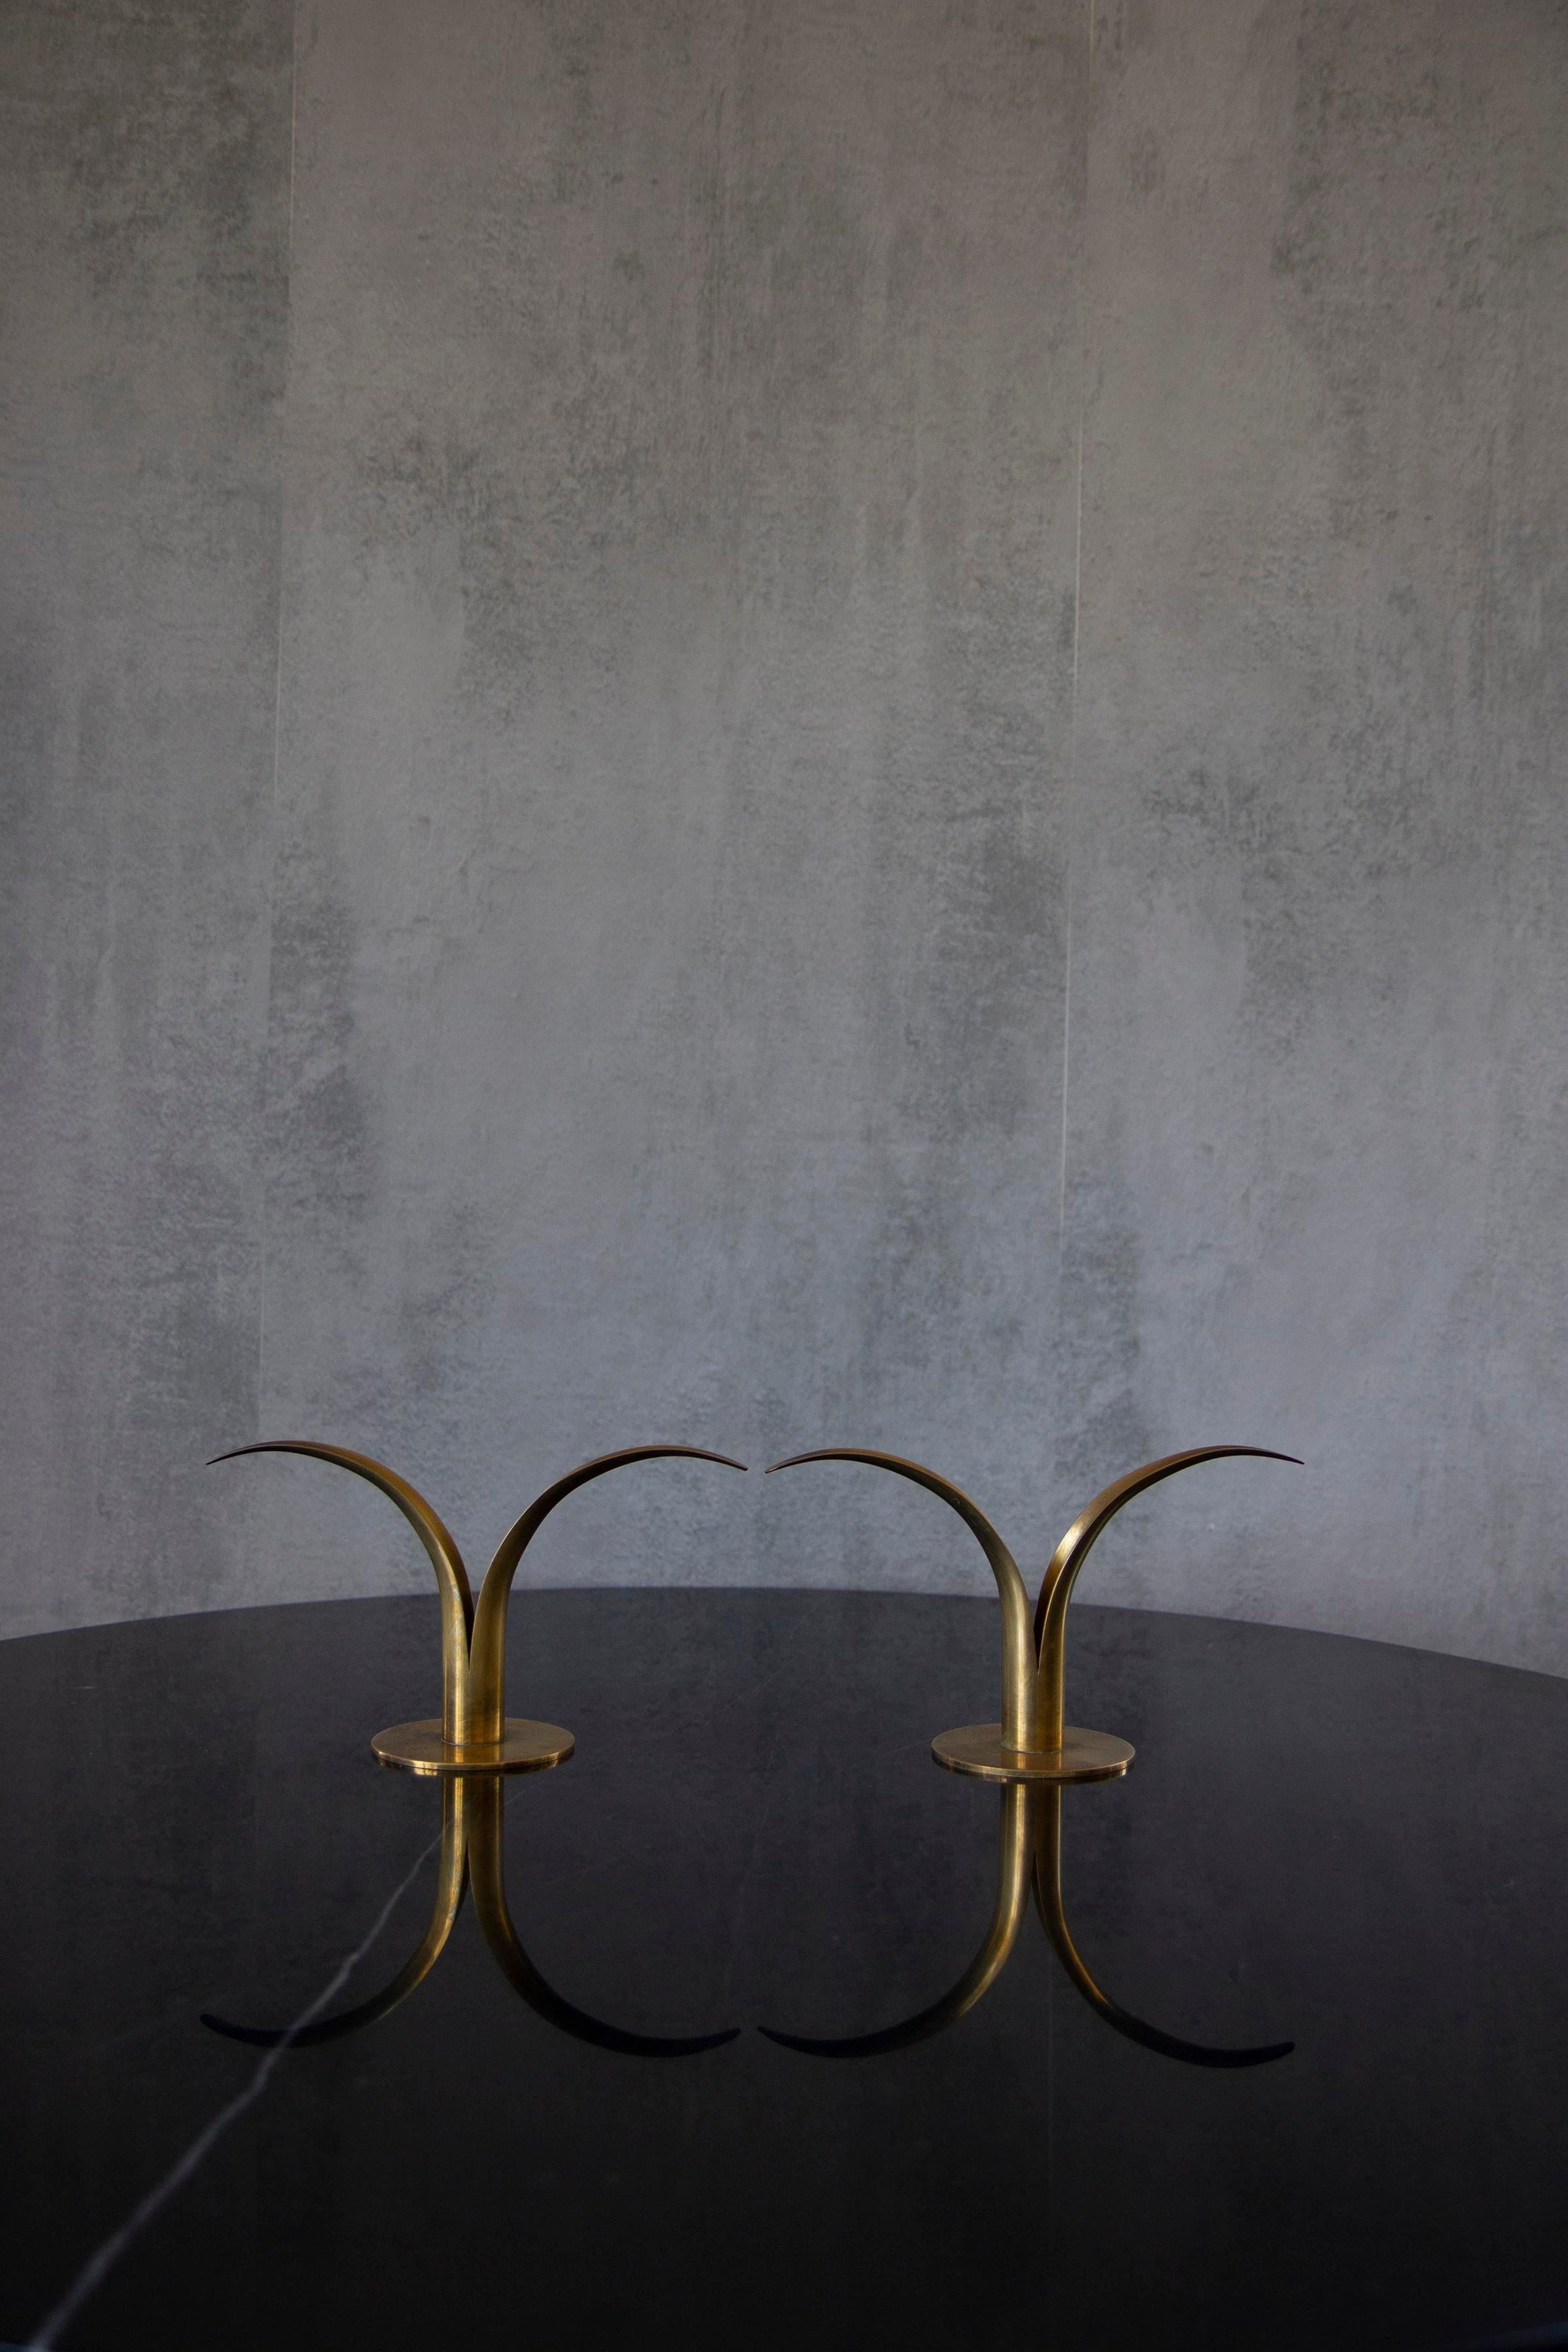 Pair of organic candlesticks/candleholders, designed by Ivar Åhlenius Björk for Ystad Metall. Made of brass and lacquered steel. Stamped.